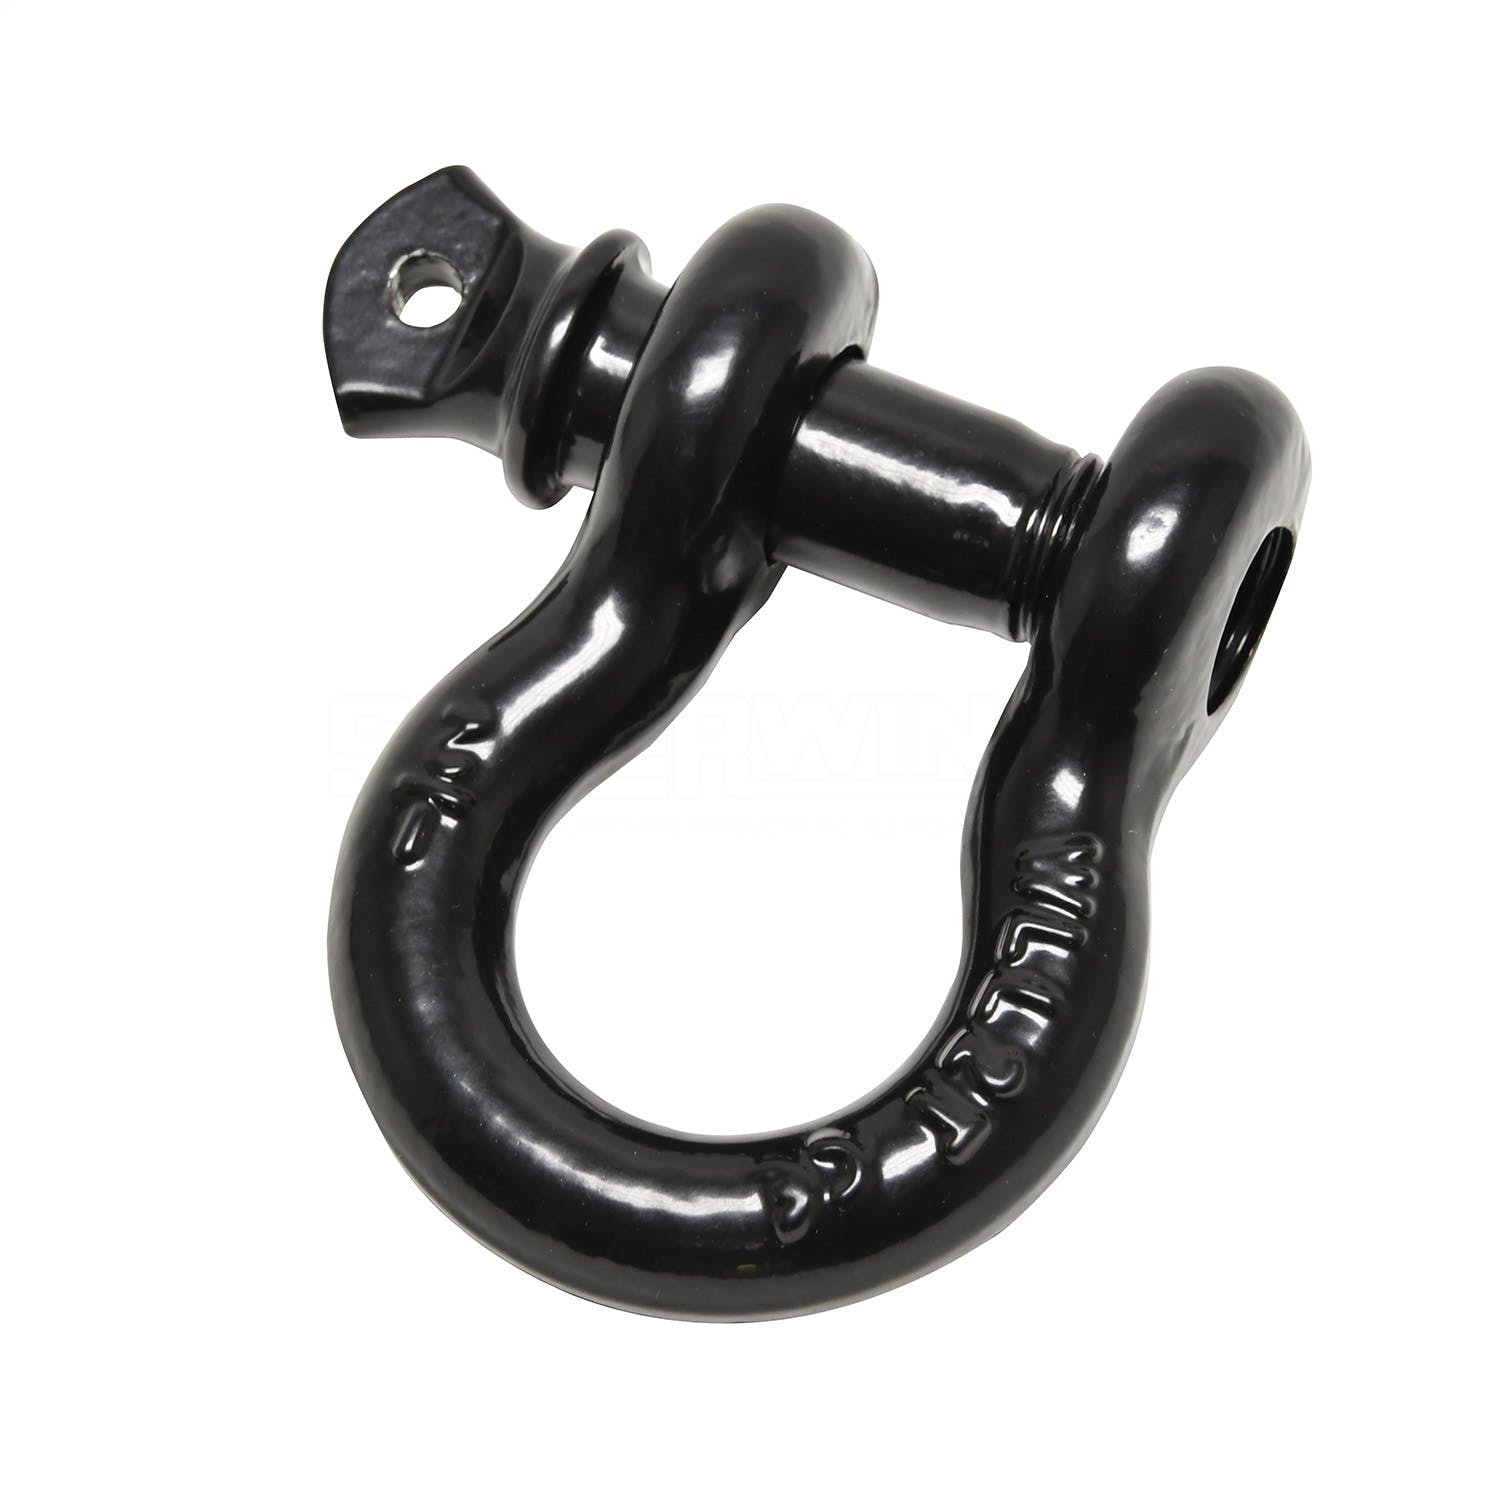 Superwinch 2302285 Bow Shackle